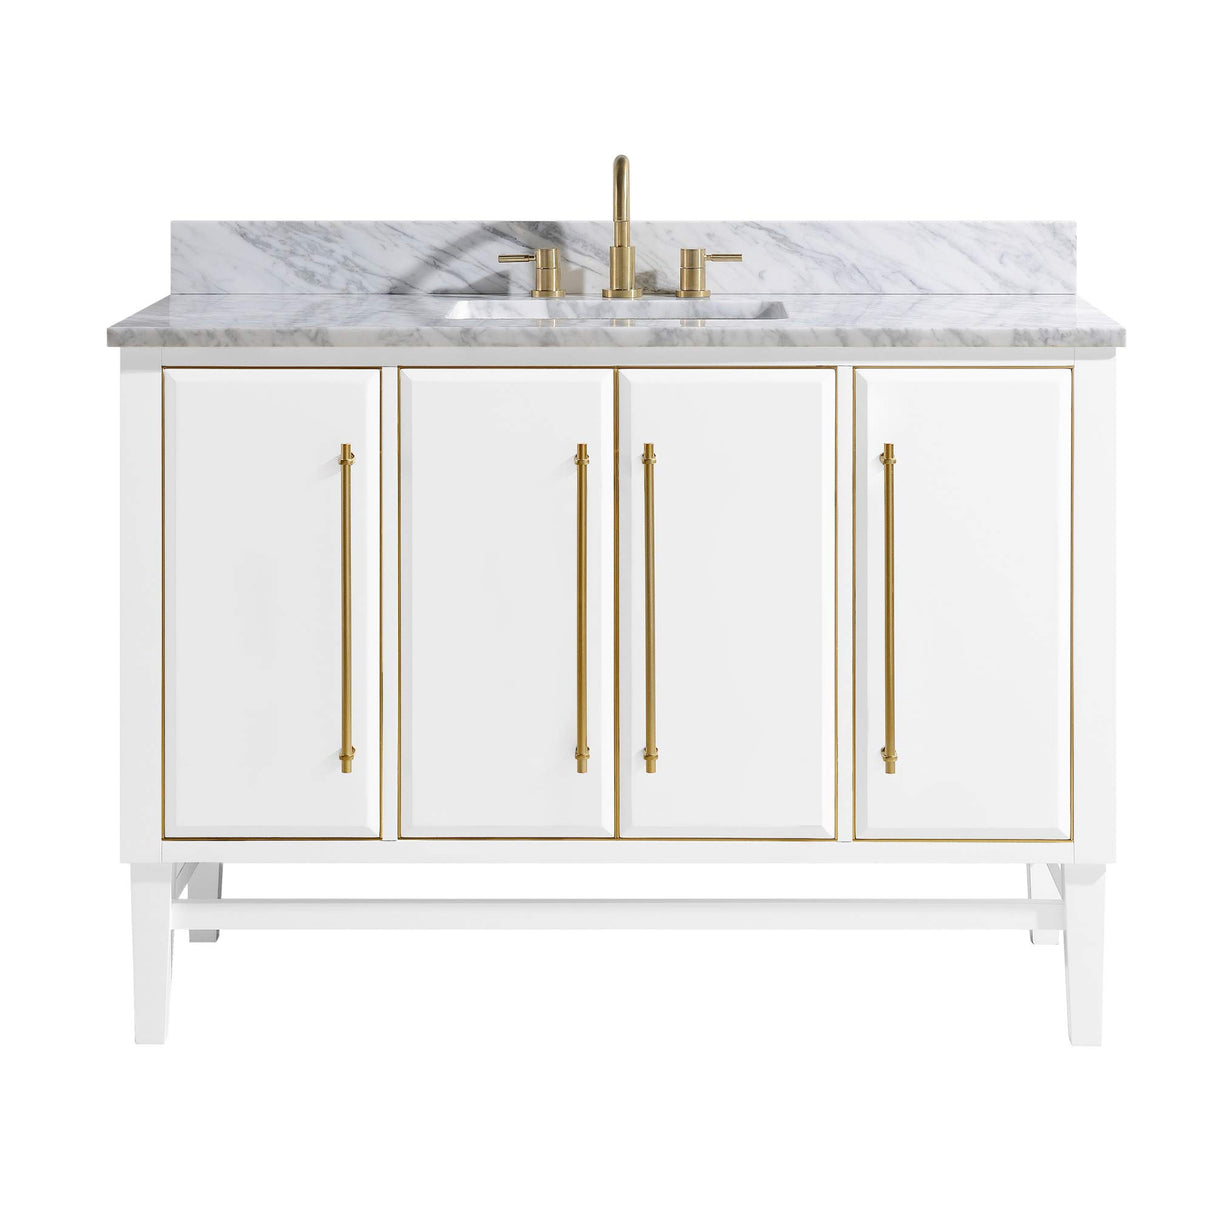 Avanity Mason 49 in. Vanity Combo in White with Gold Trim and Carrara White Marble Top